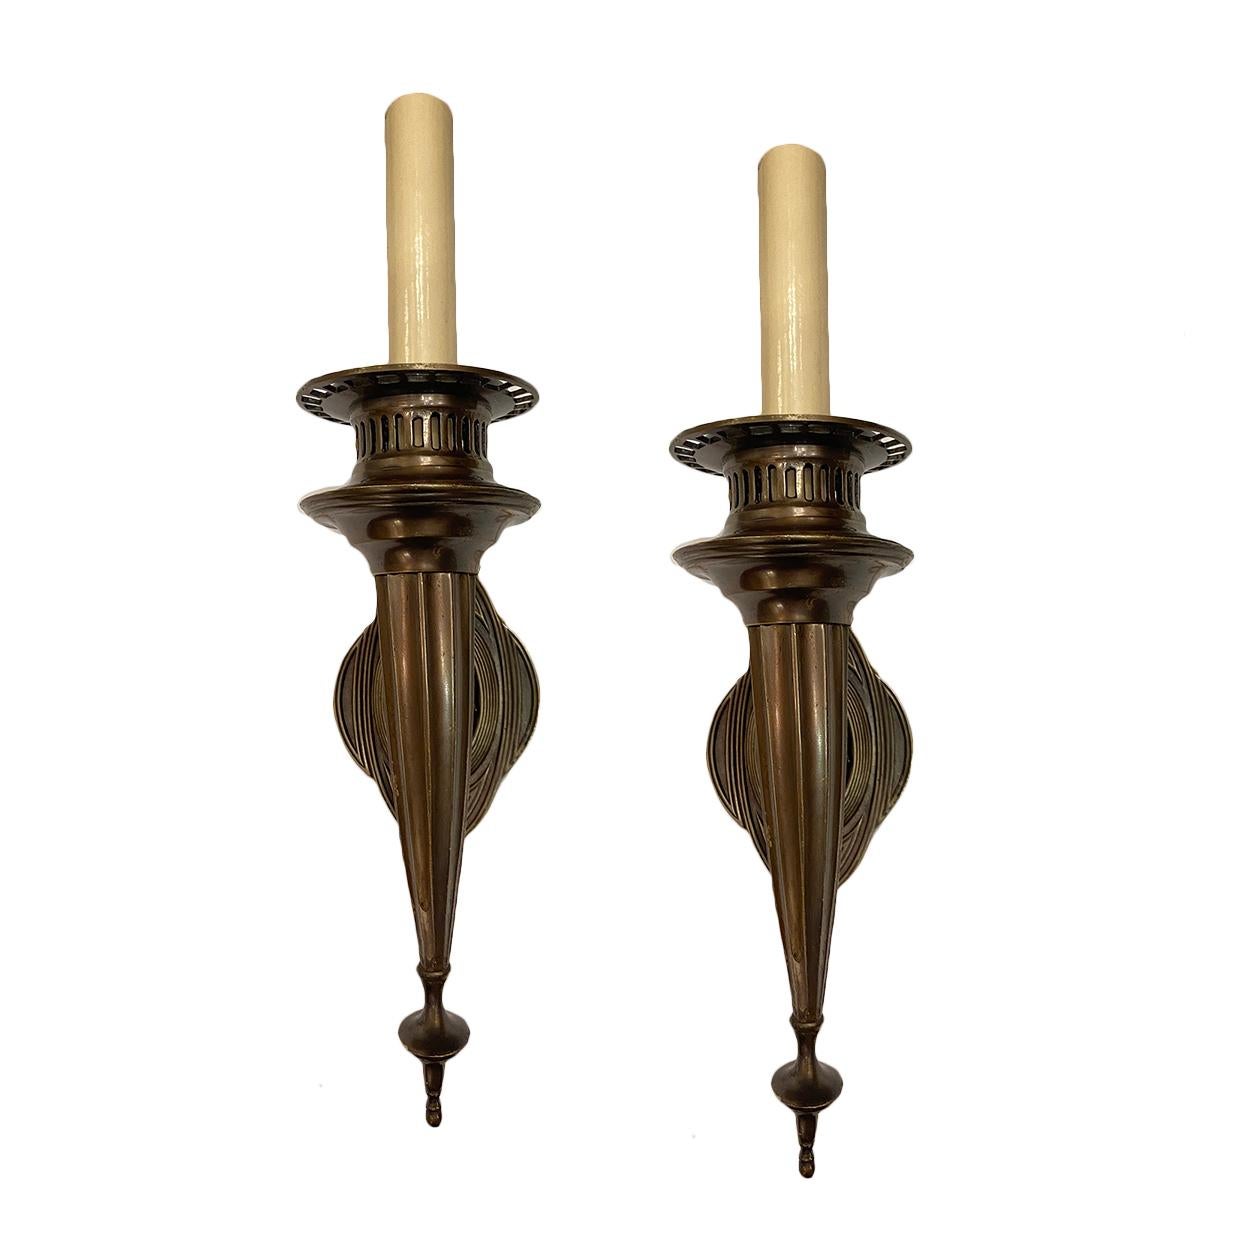 A pair of circa 1920's Italian neoclassic-style sconces.

Measurement:
Height: 13